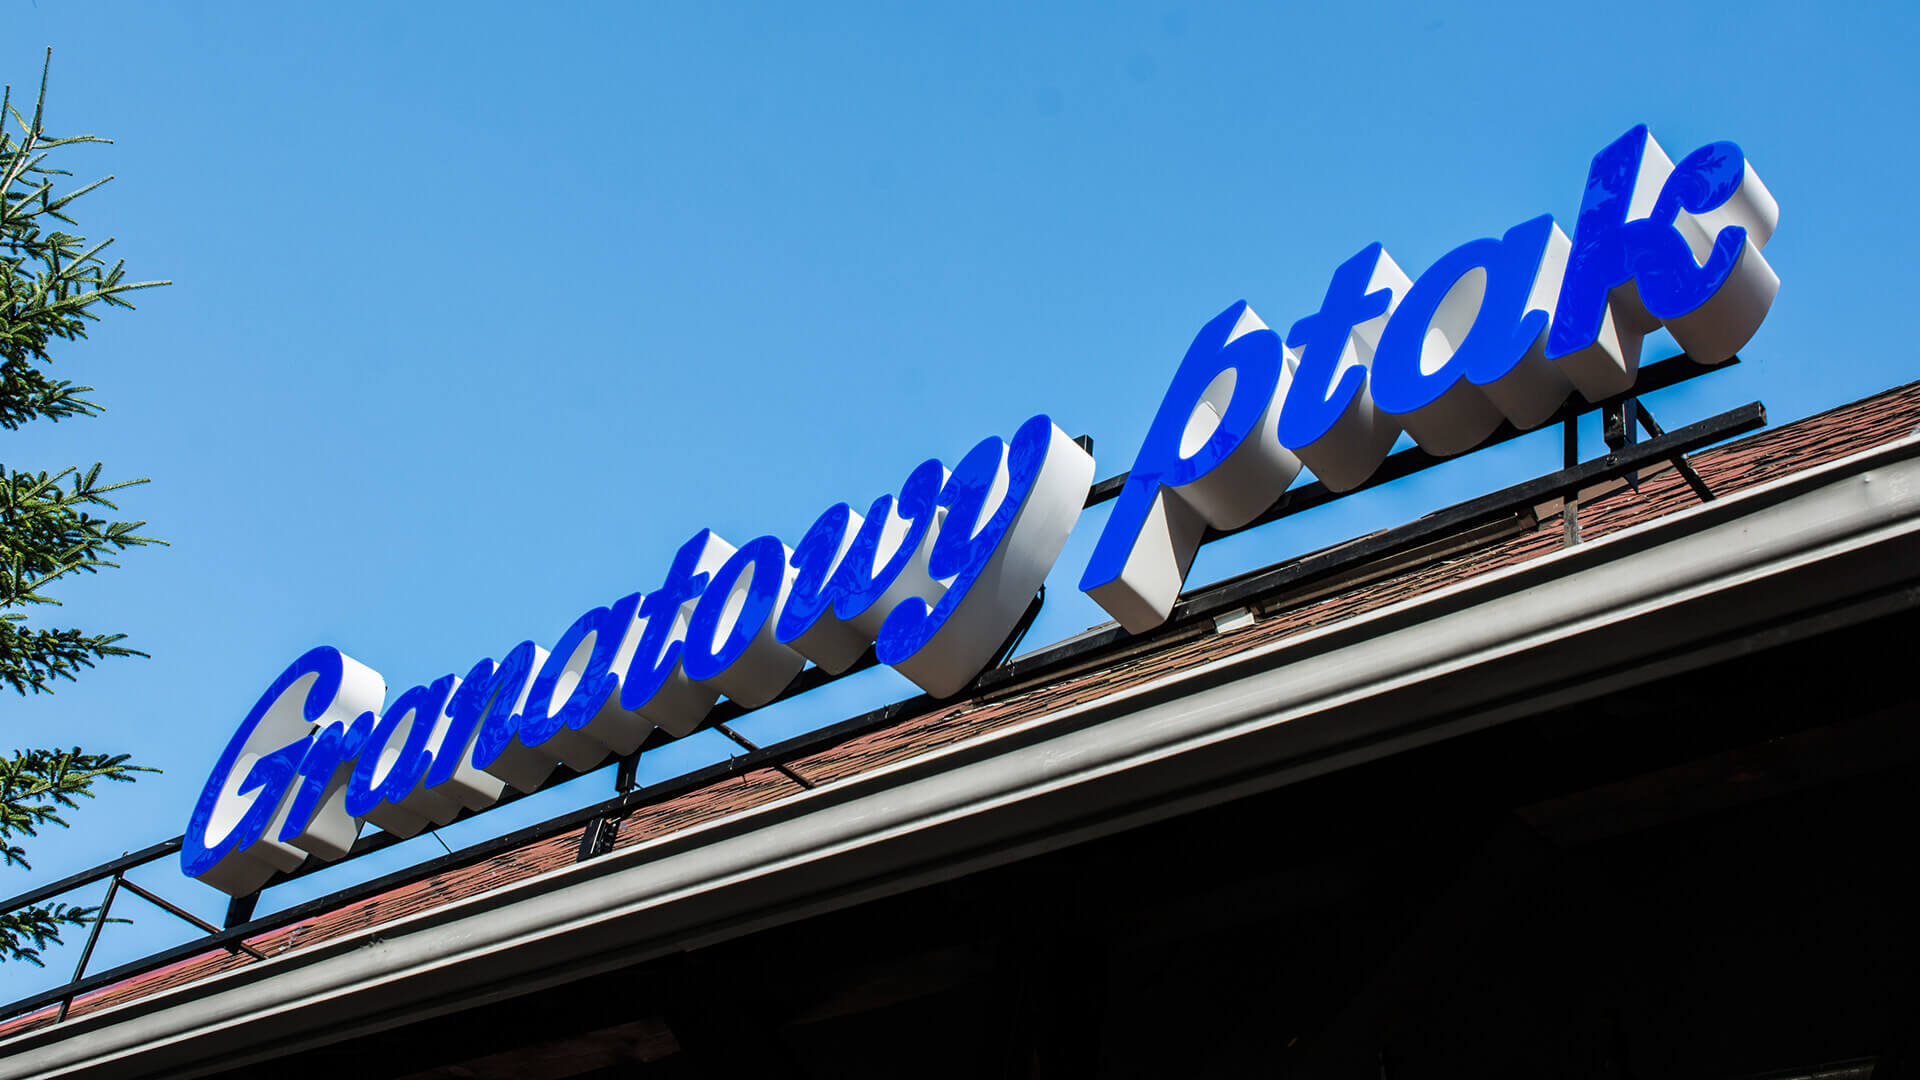 navy bird restaurant - letters-from-plexi-blue-blue-bird-lettering-on-the-cornice-of-roof lettering-led-lighting-spatial-lettering-blue-lighting 